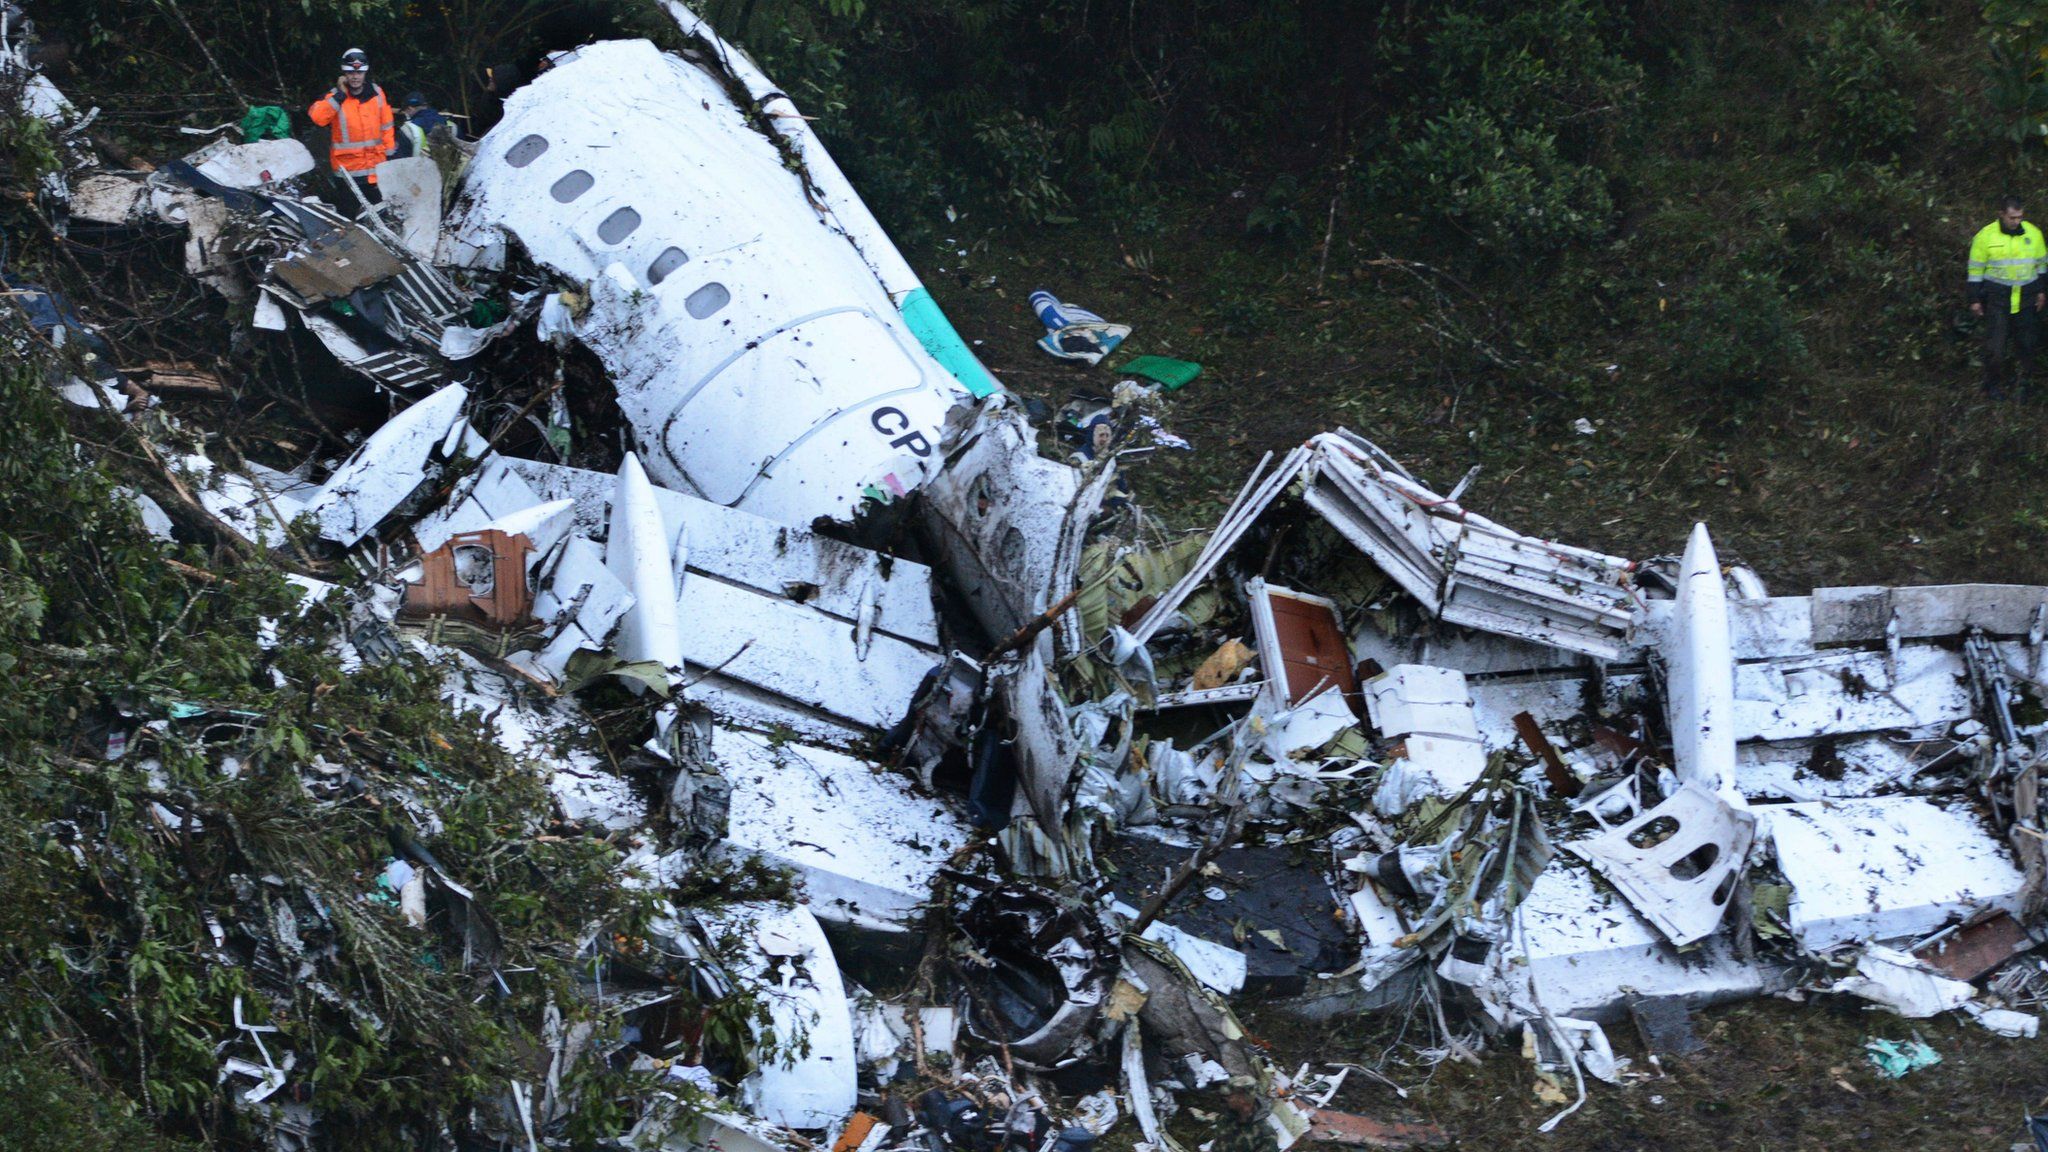 Rescue workers stand at the wreckage site of a chartered airplane that crashed in a mountainous area outside Medellin, Colombia